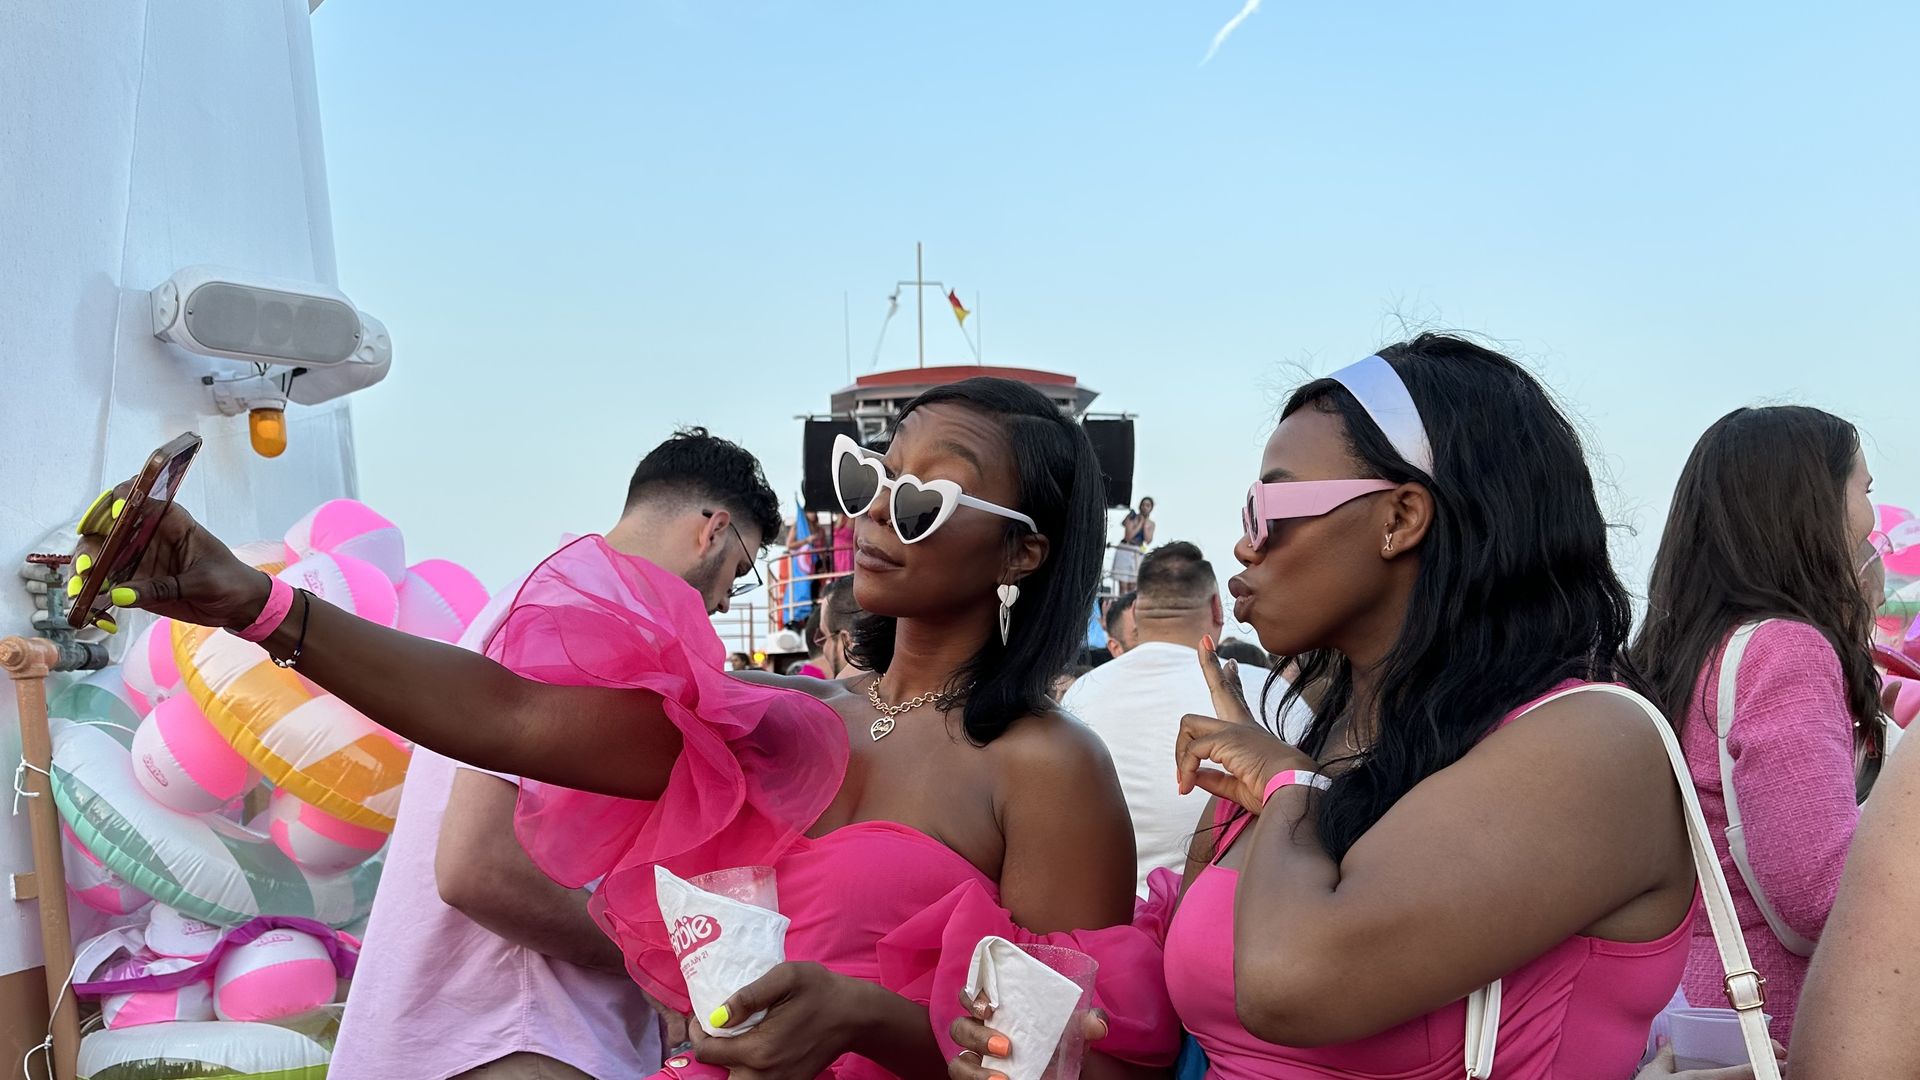 Two stylish Black women in pink dresses take a selfie on the Barbie boat cruise.